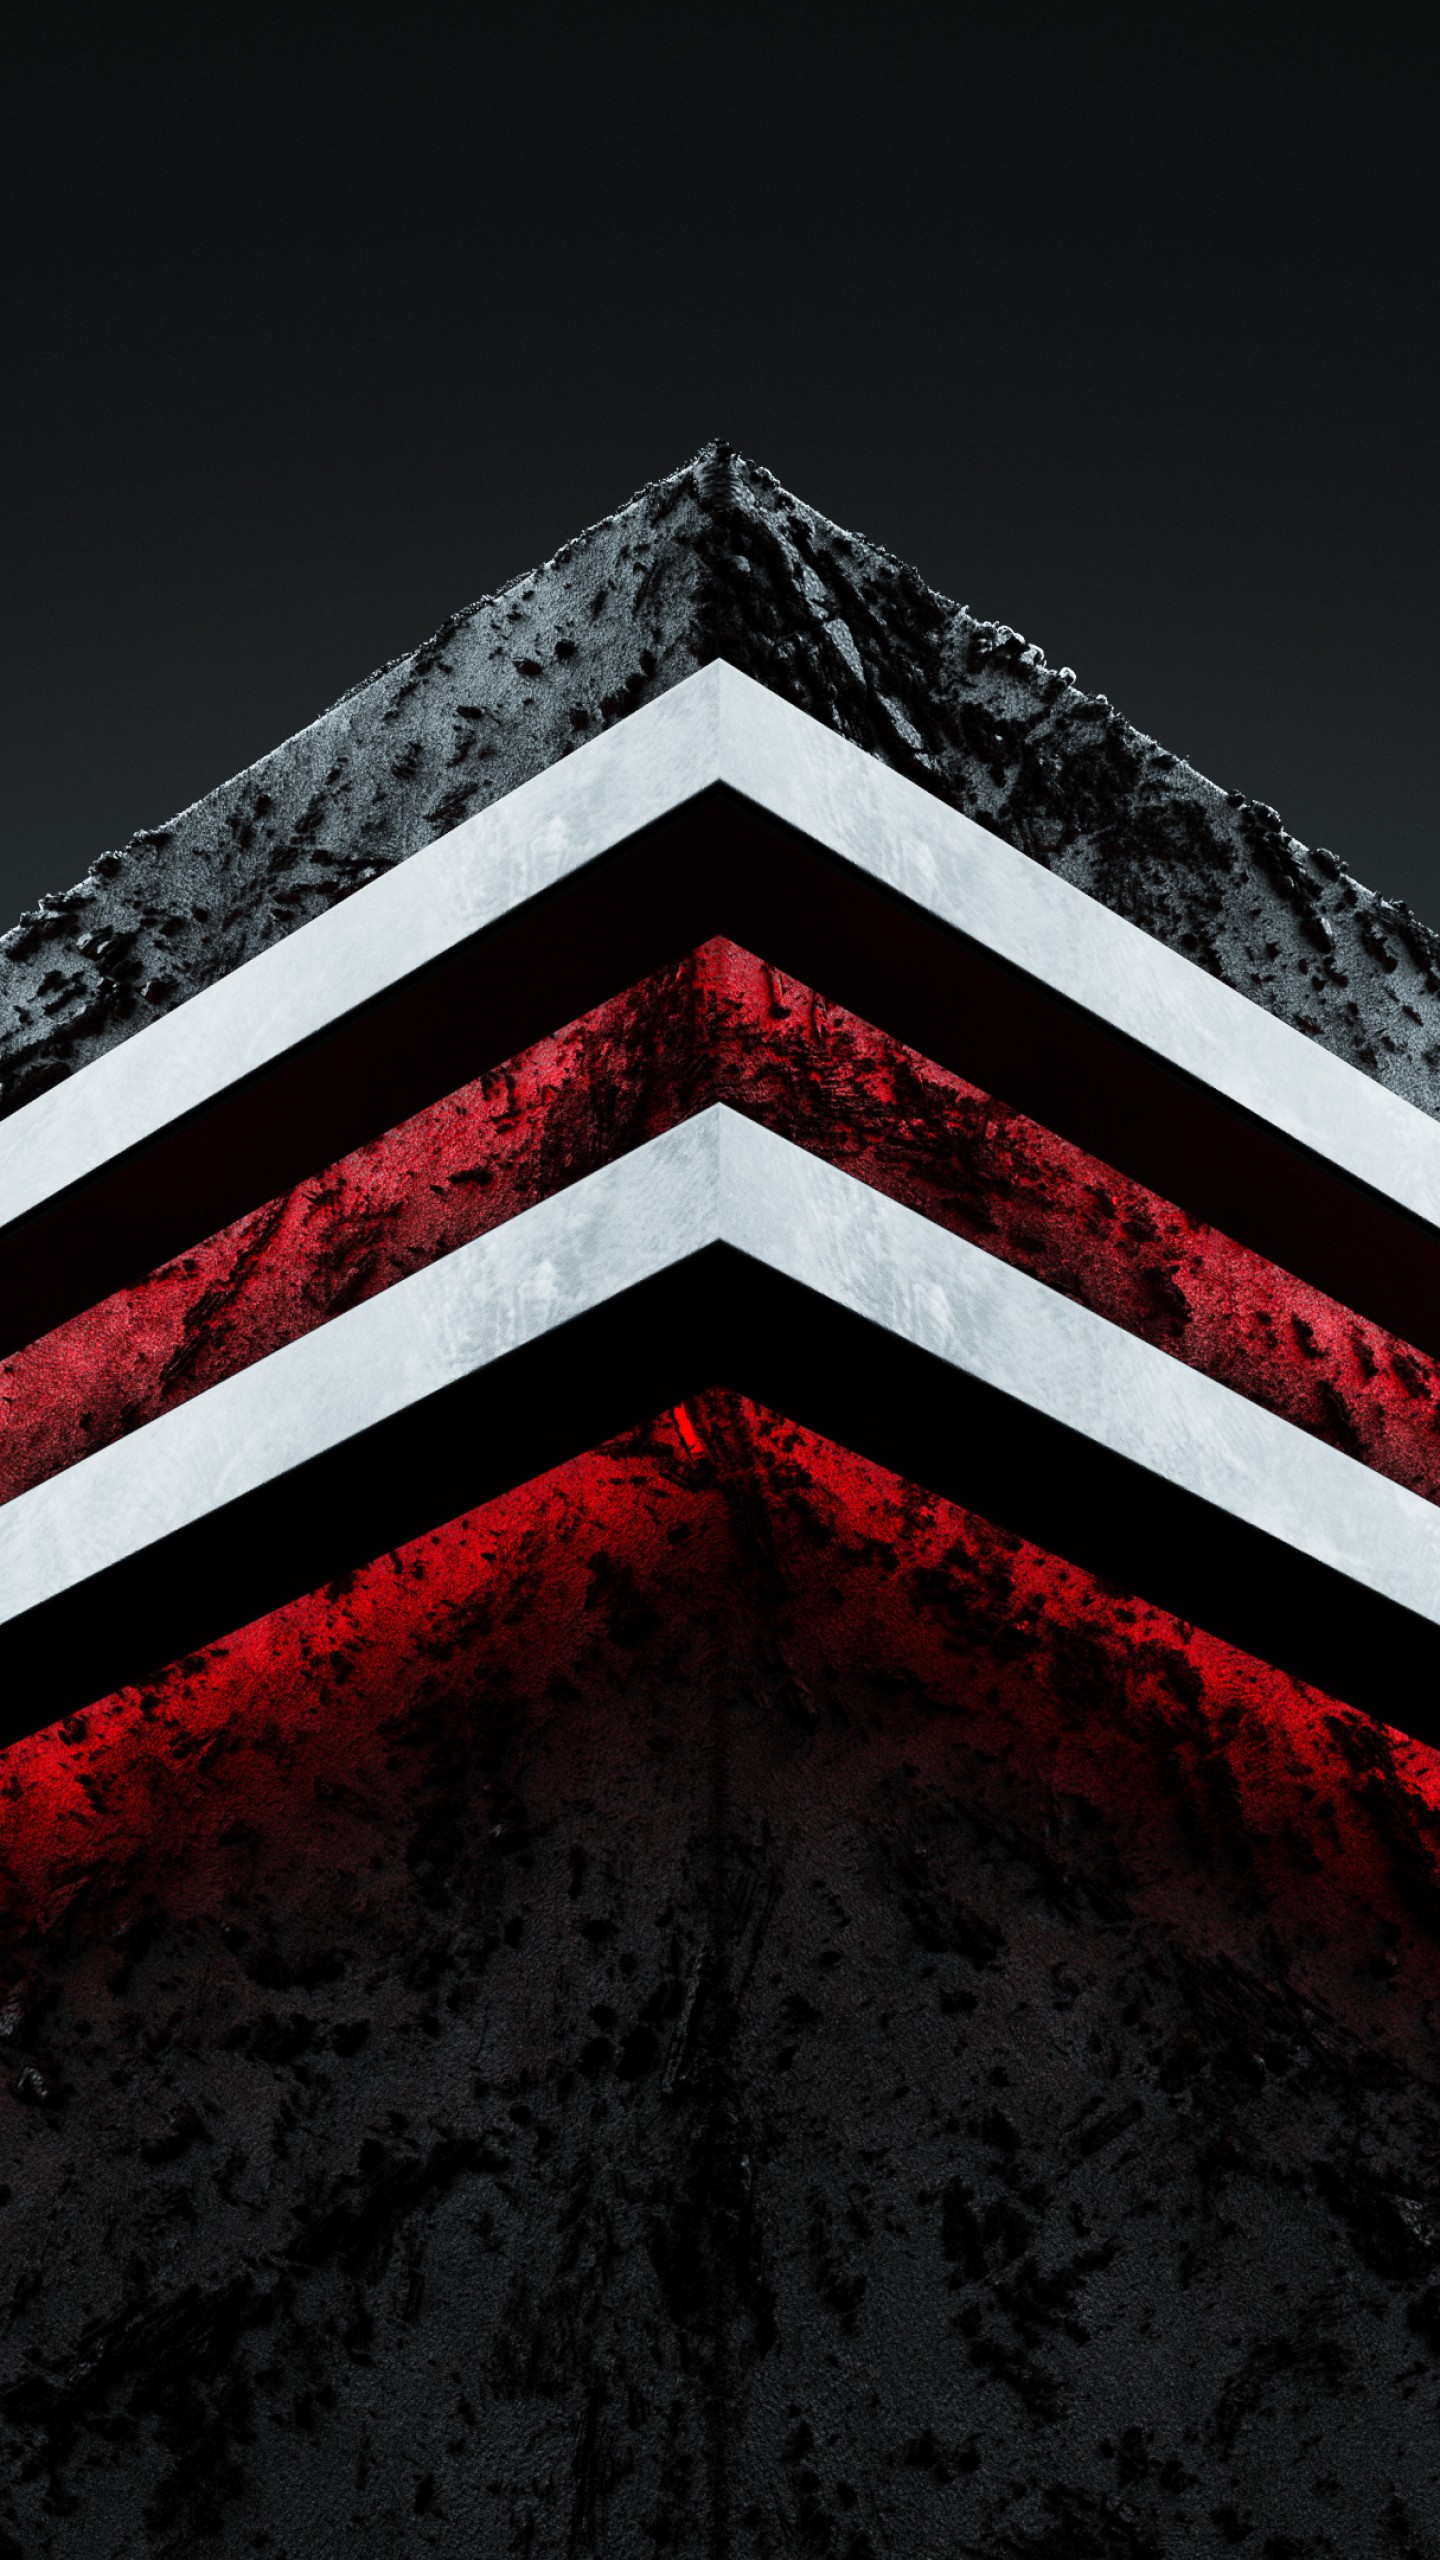 1440X2560 Black And Red Wallpapers